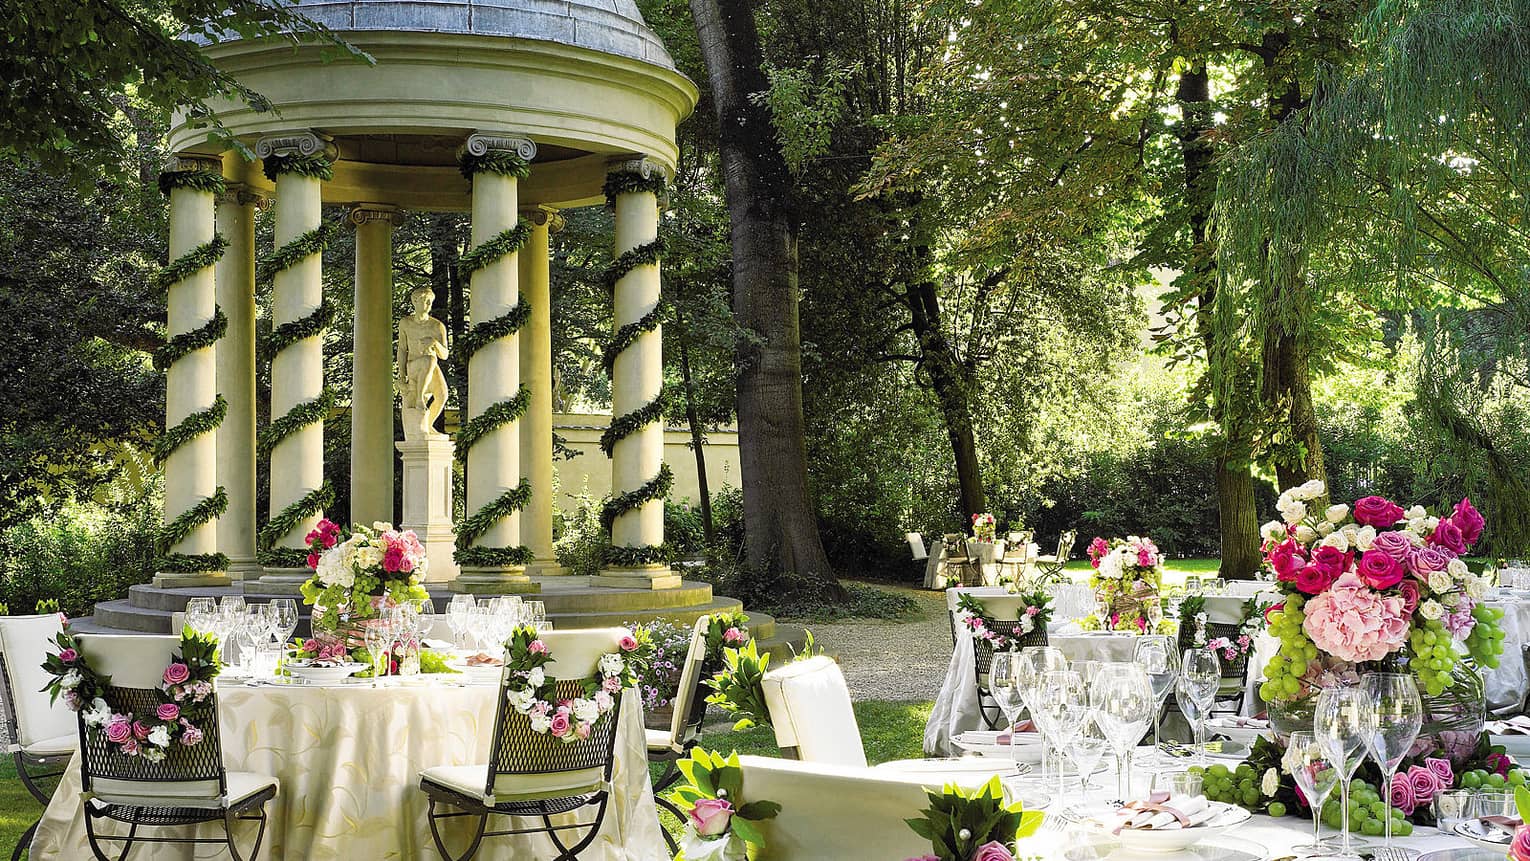 Garden reception, round, flower covered banquet tables by gazebo with white pillars